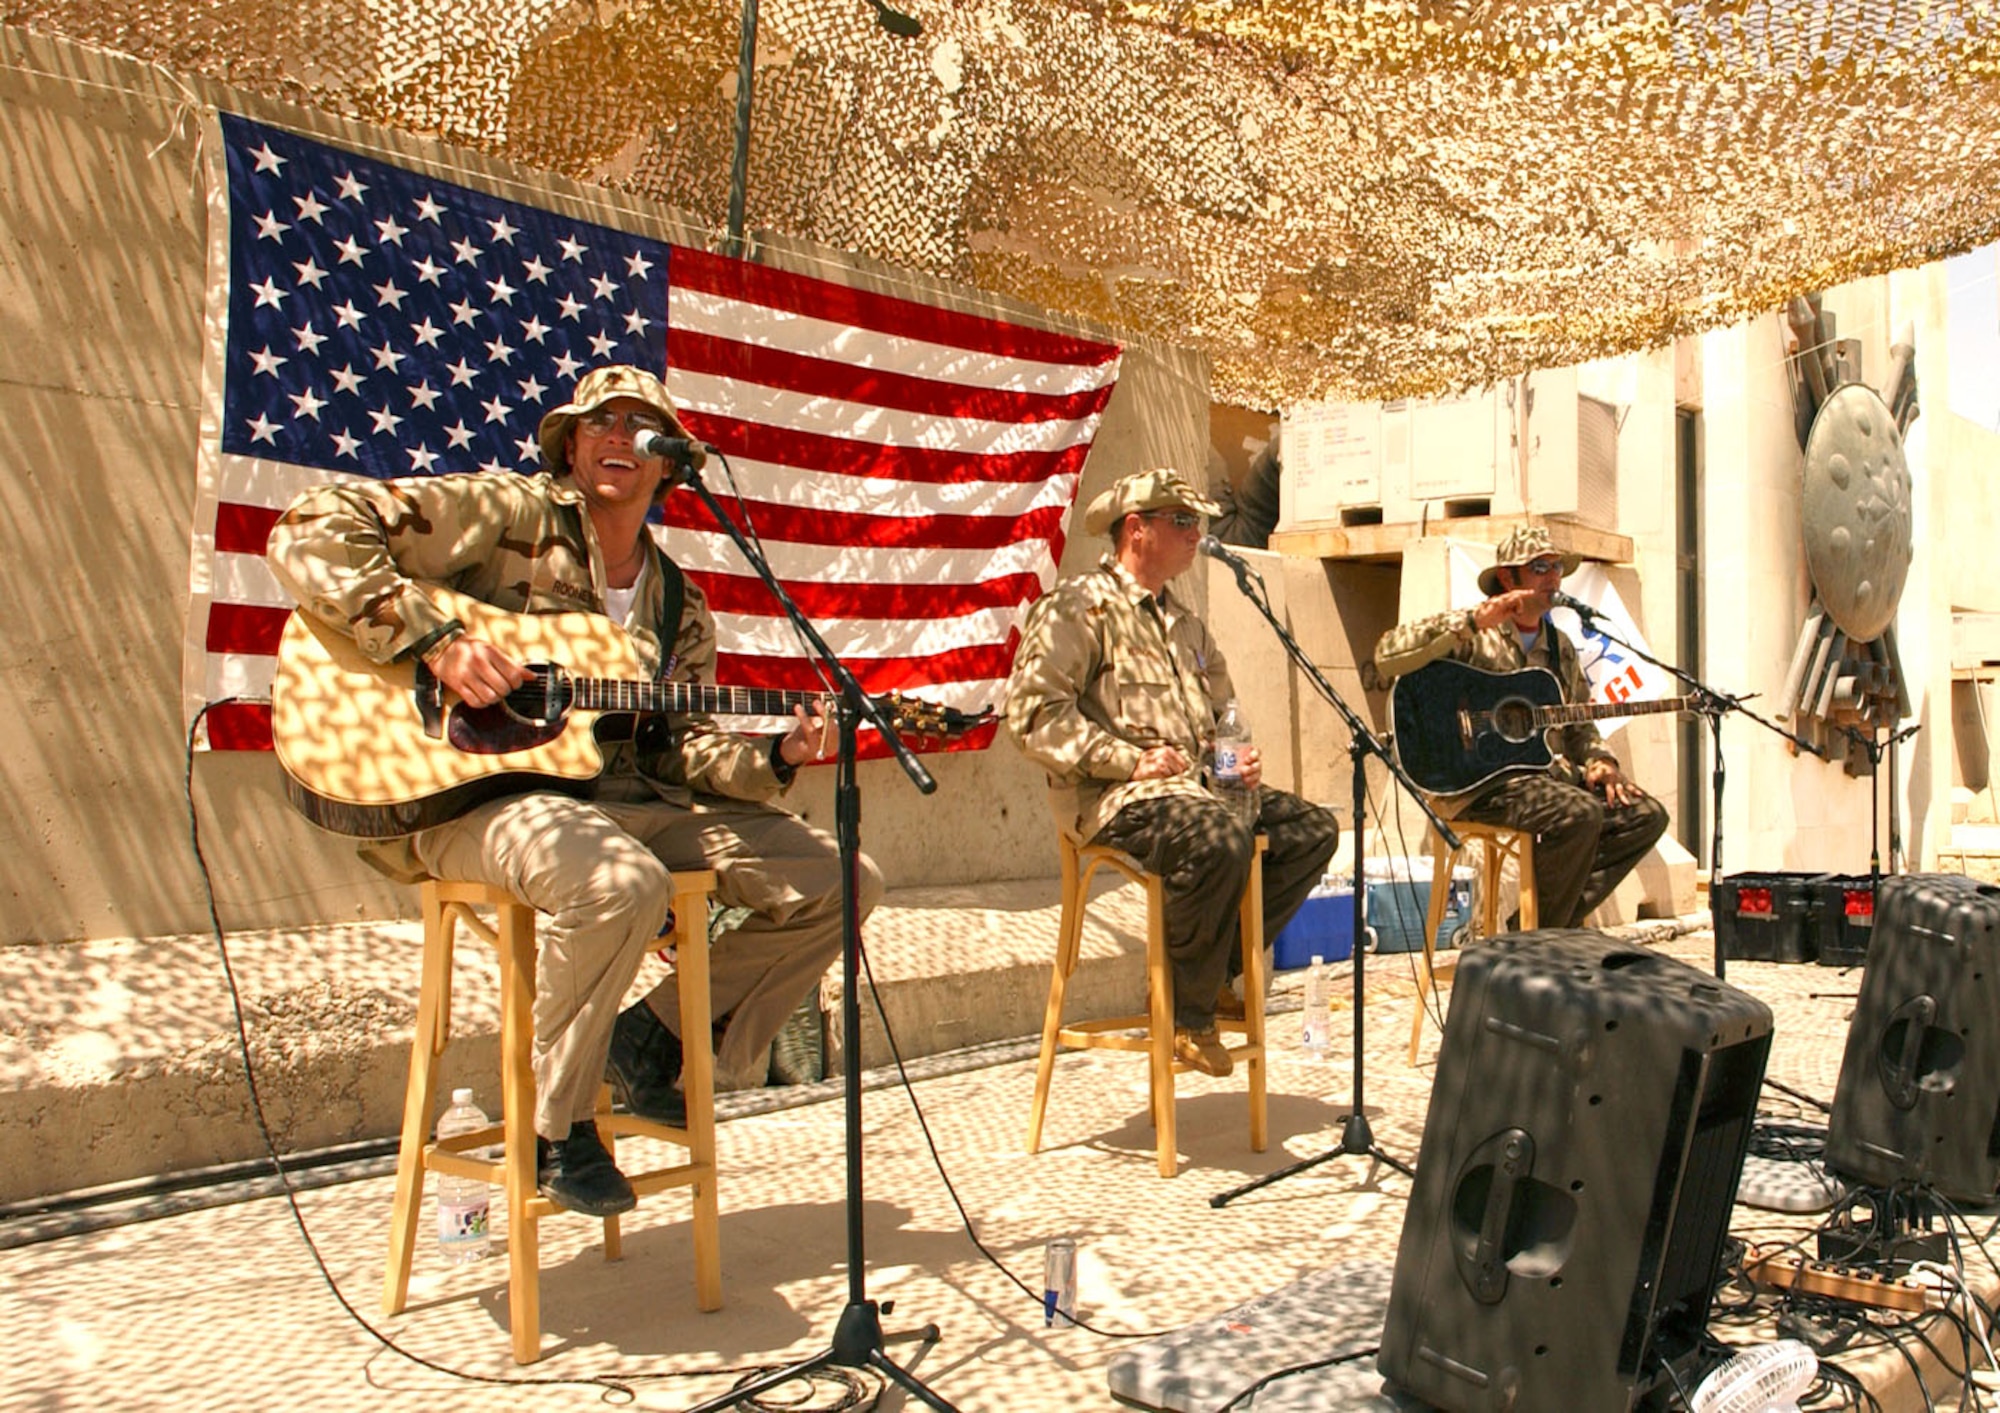 BAGHDAD, Iraq -- Country music group Rascal Flatts performs for Airmen and Soldiers at Baghdad International Airport on Aug. 5 during their United Services Organization tour to support the people supporting Operation Iraqi Freedom.  (U.S. Air Force photo by Tech. Sgt. Brian Davidson)    